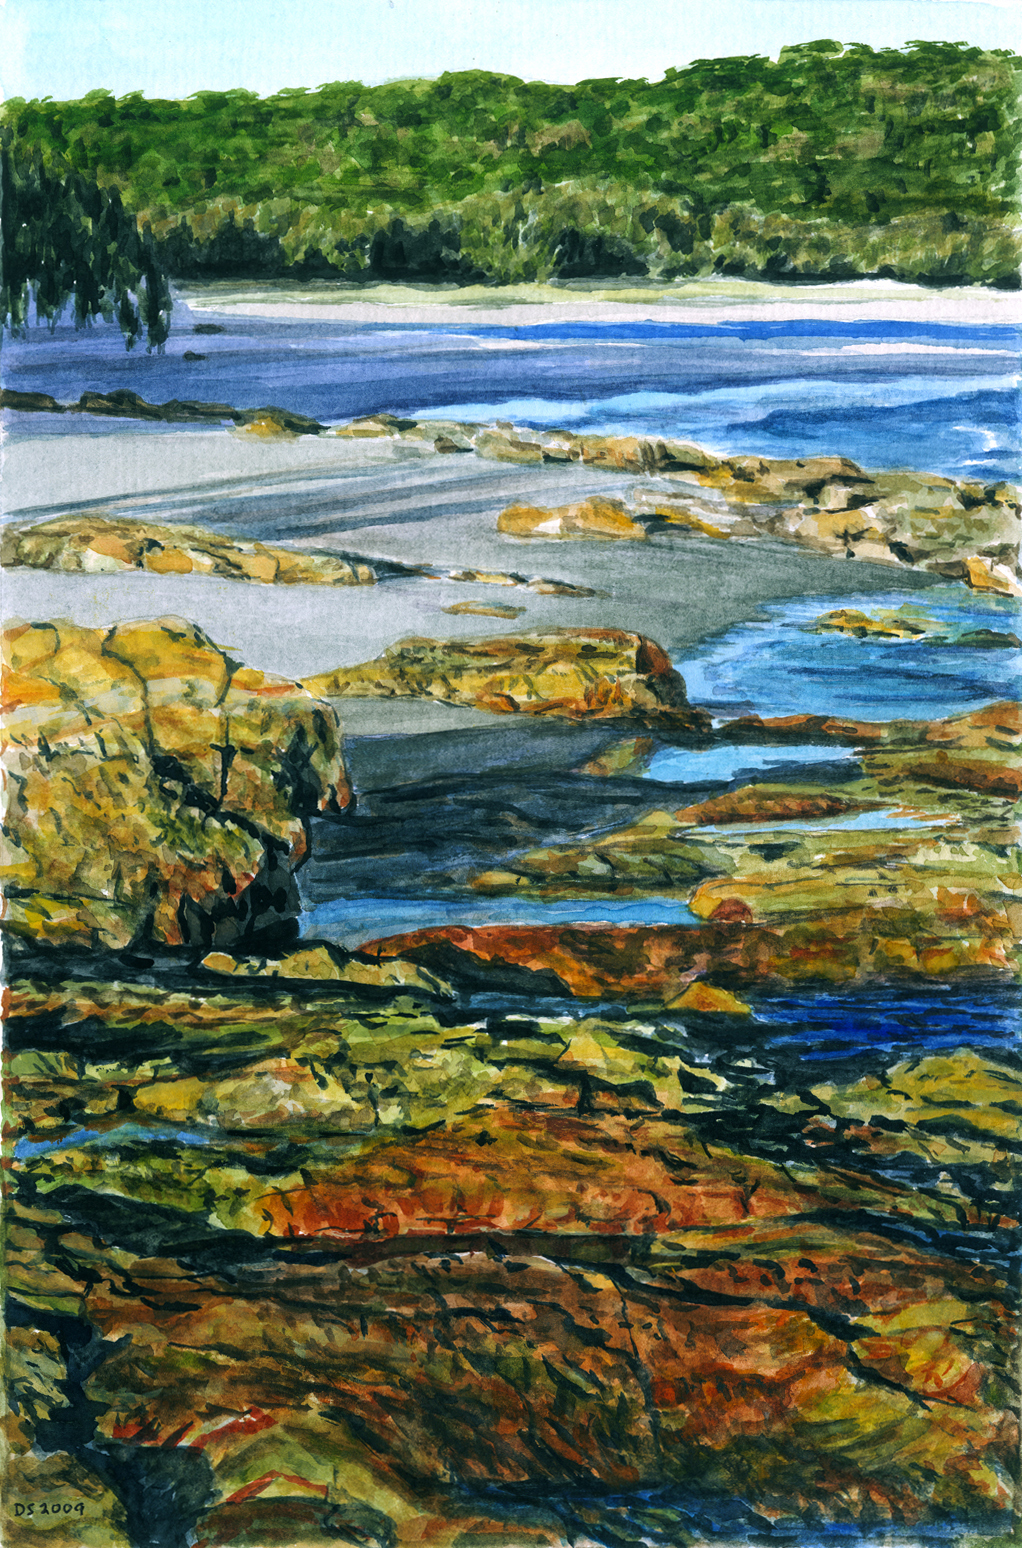 Water color of rocks in a river